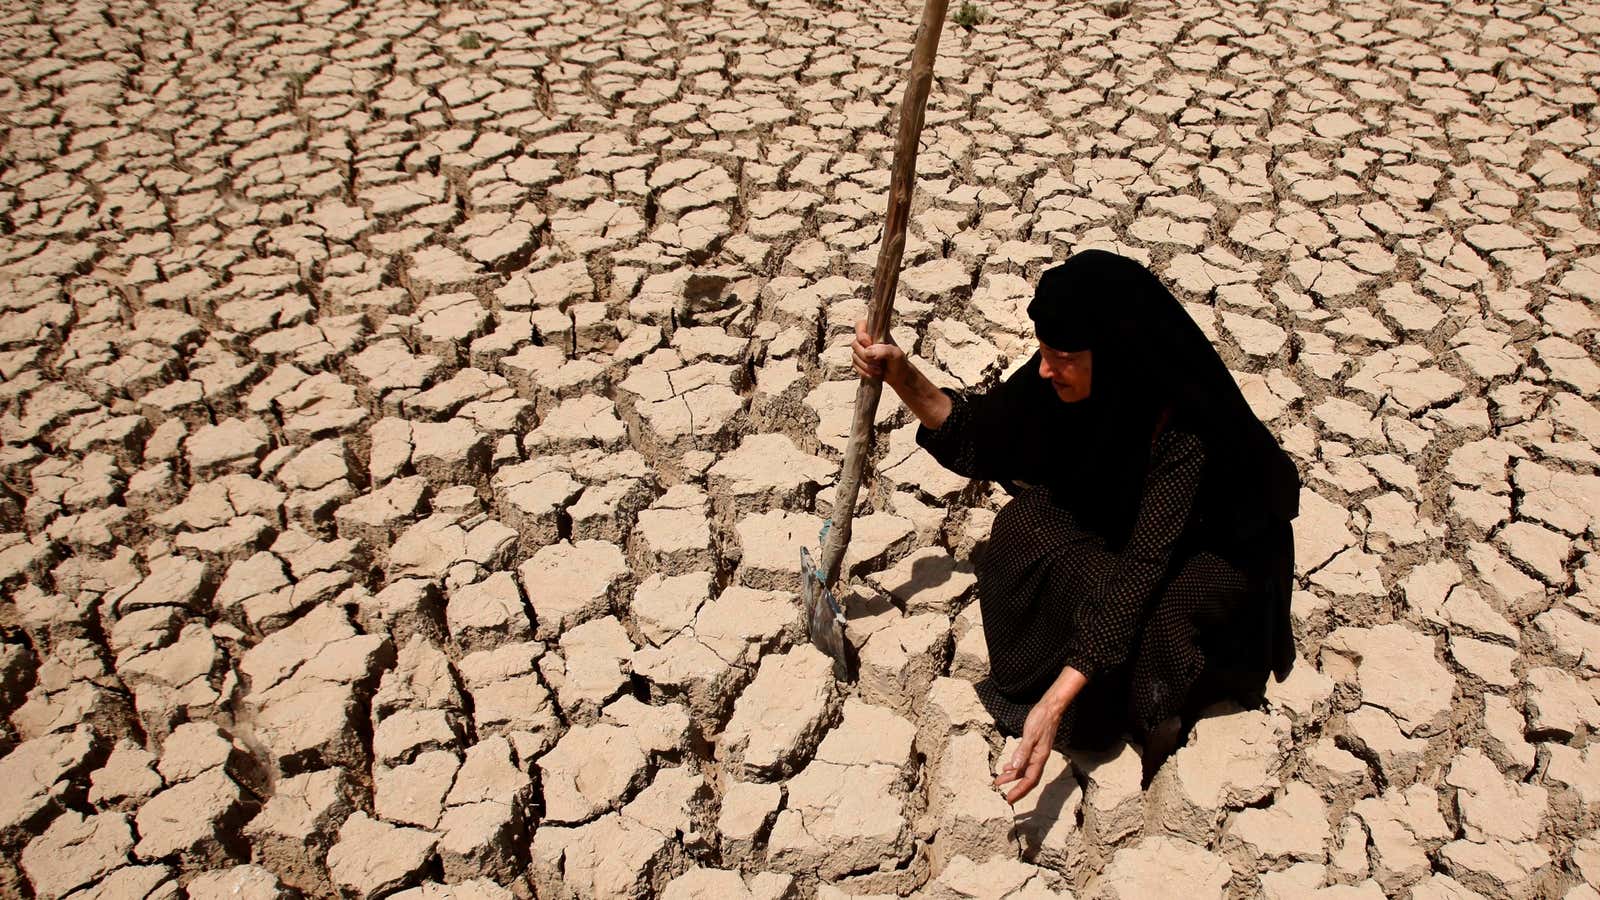 The Middle East continues to break records for hottest temperatures ever recorded on earth.